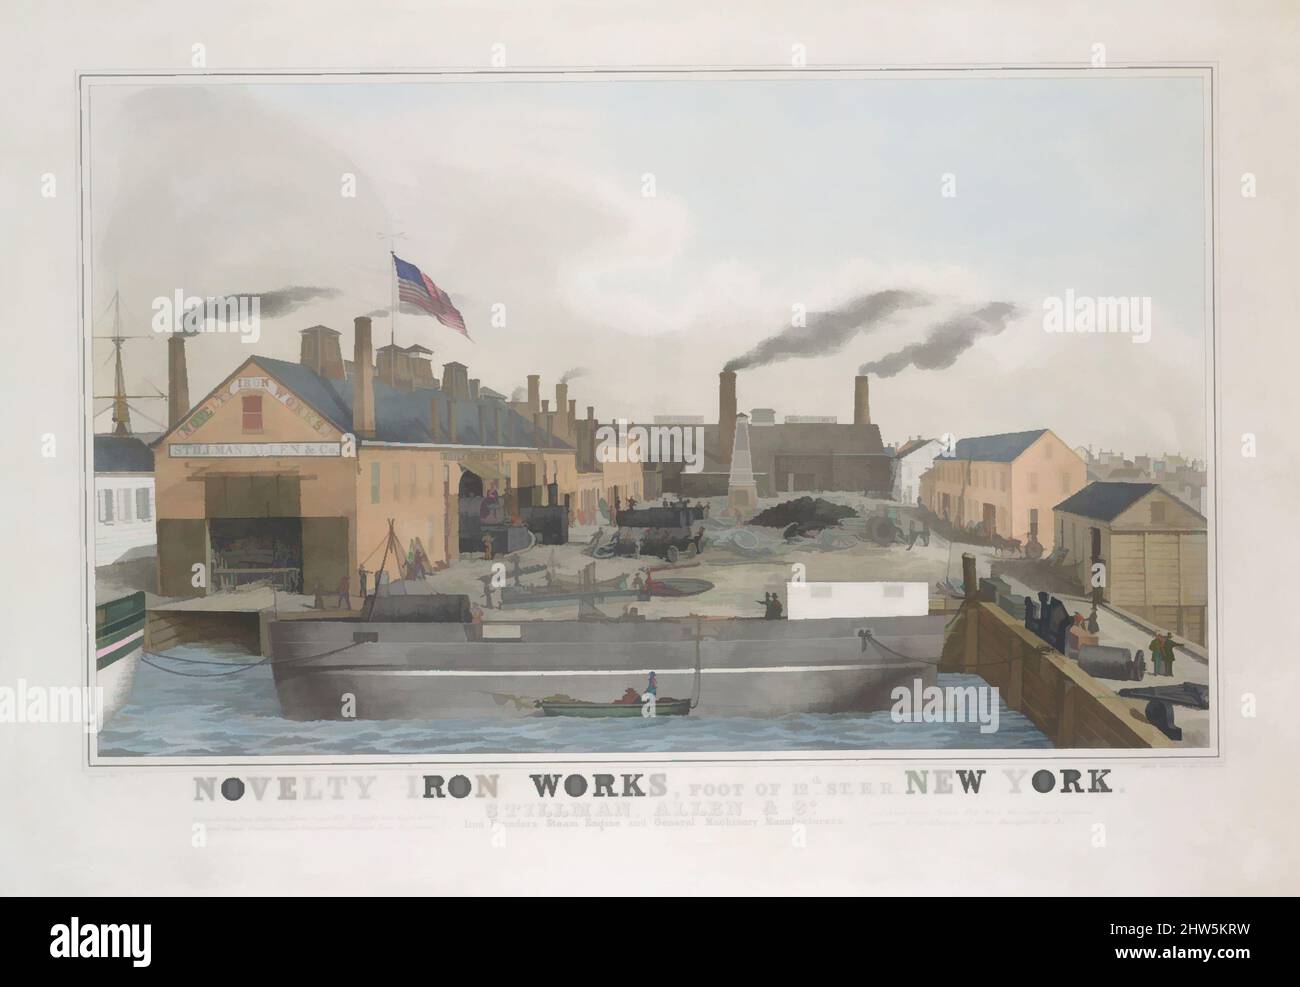 Art inspired by Novelty Iron works, Foot of 12th St. E.R. New York. Stillman, Allen & Co., Iron Founders, Steam Engine and General Machinery Manufacturers, 1841–44, Lithograph printed in colors with hand-coloring, image: 18 15/16 x 31 1/4 in. (48.1 x 79.4 cm), John Penniman (American, Classic works modernized by Artotop with a splash of modernity. Shapes, color and value, eye-catching visual impact on art. Emotions through freedom of artworks in a contemporary way. A timeless message pursuing a wildly creative new direction. Artists turning to the digital medium and creating the Artotop NFT Stock Photo